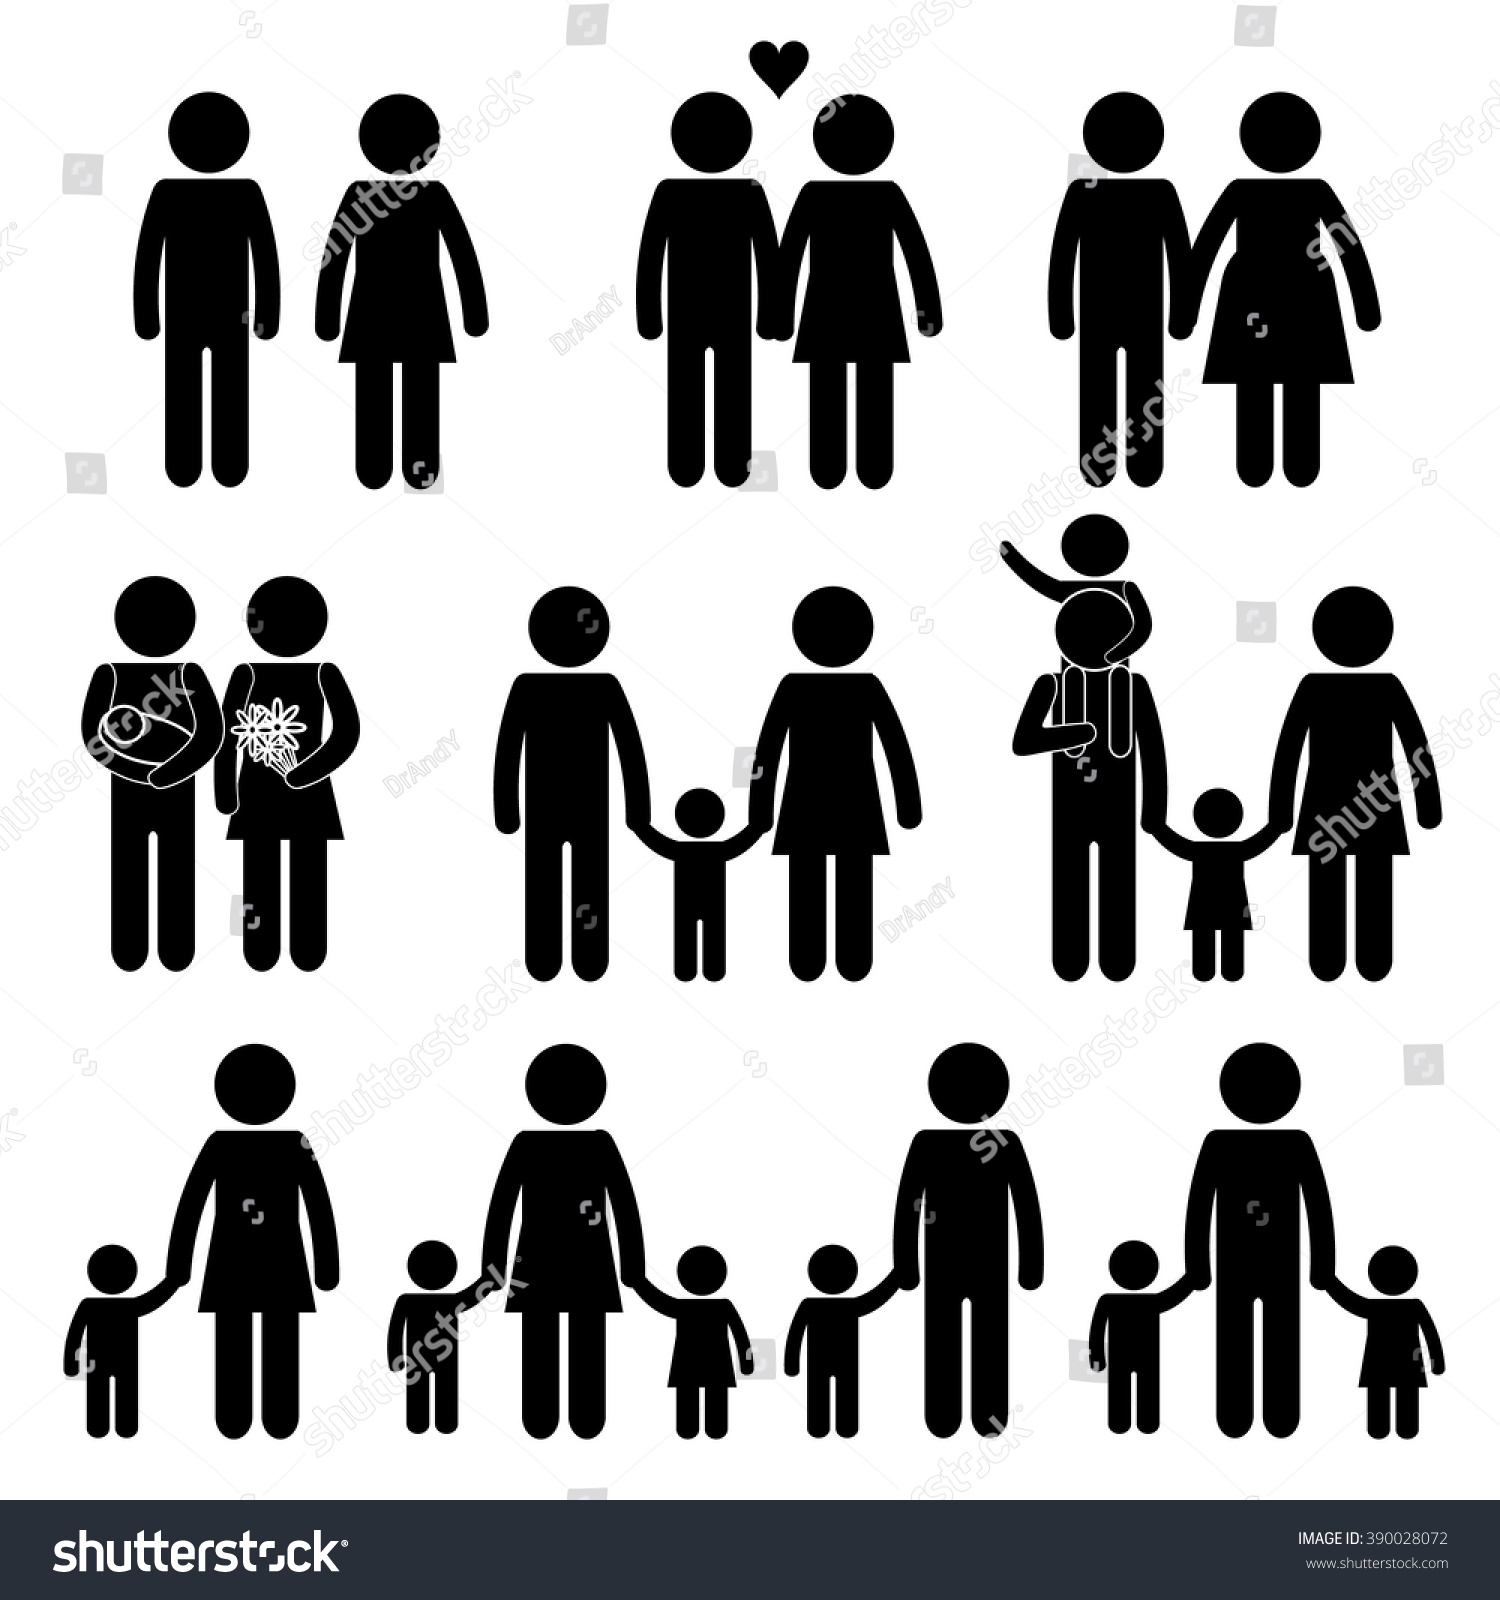 Download Stick Figure Family Vector at Vectorified.com | Collection ...